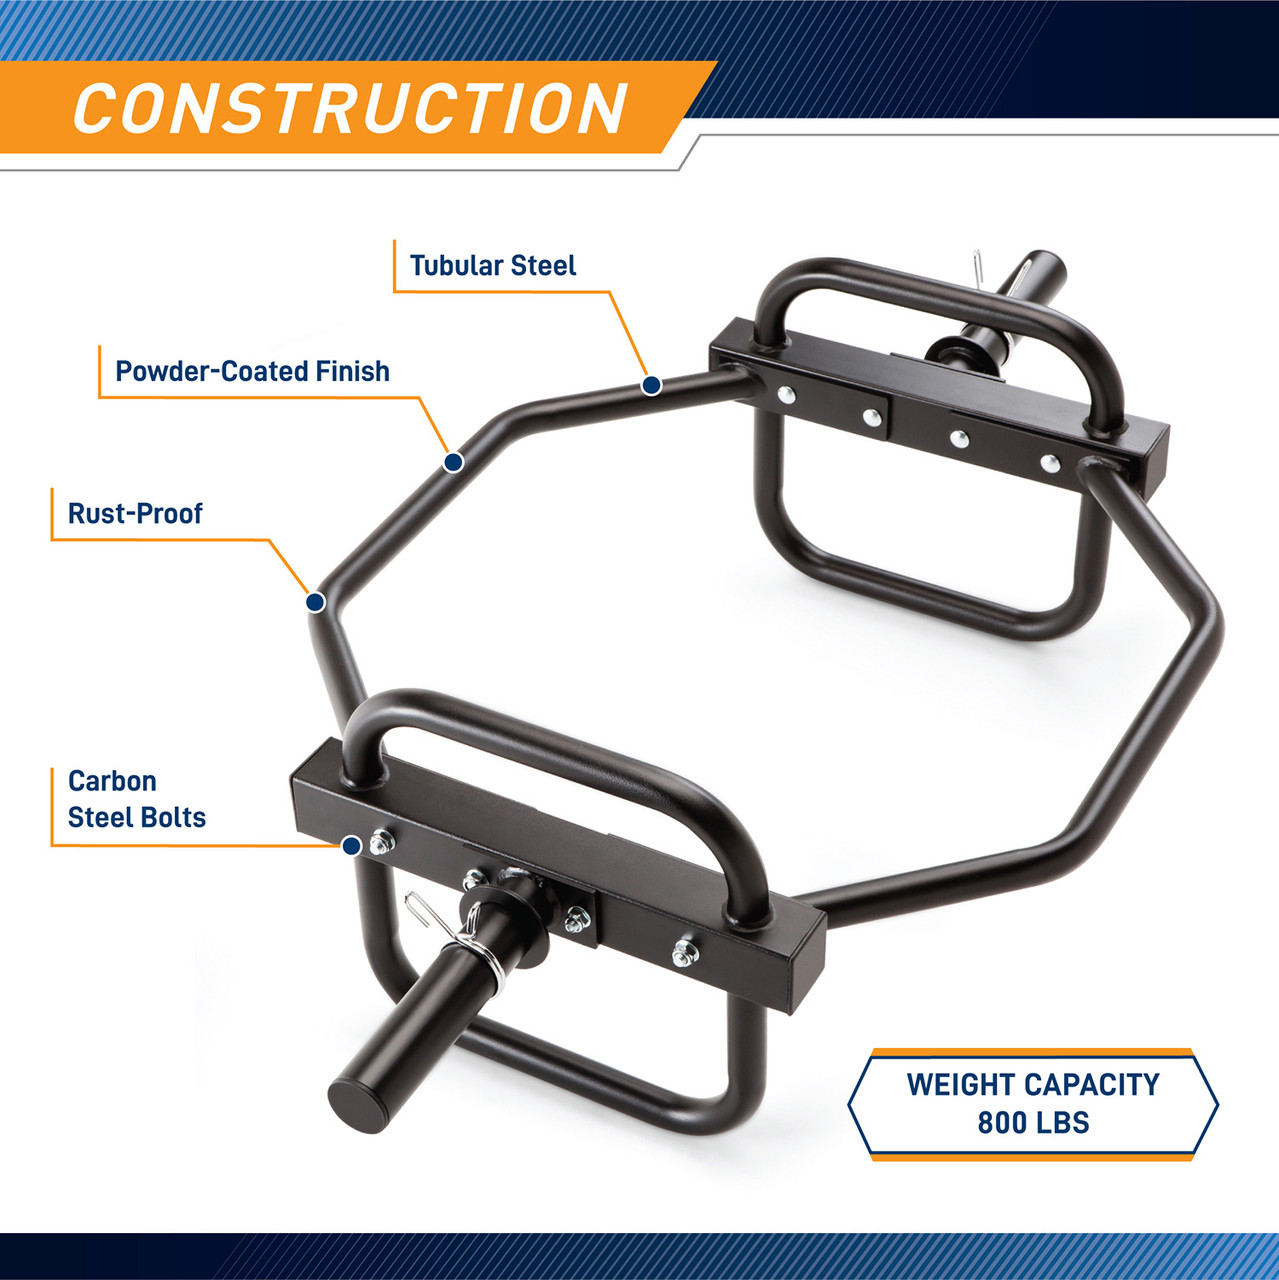 Olympic Hex Trap Bar / Shrug Bar with Raised Handles – Marcy HTB-6976 has a sturdy construction with powder coating to ensure the longevity of the unit